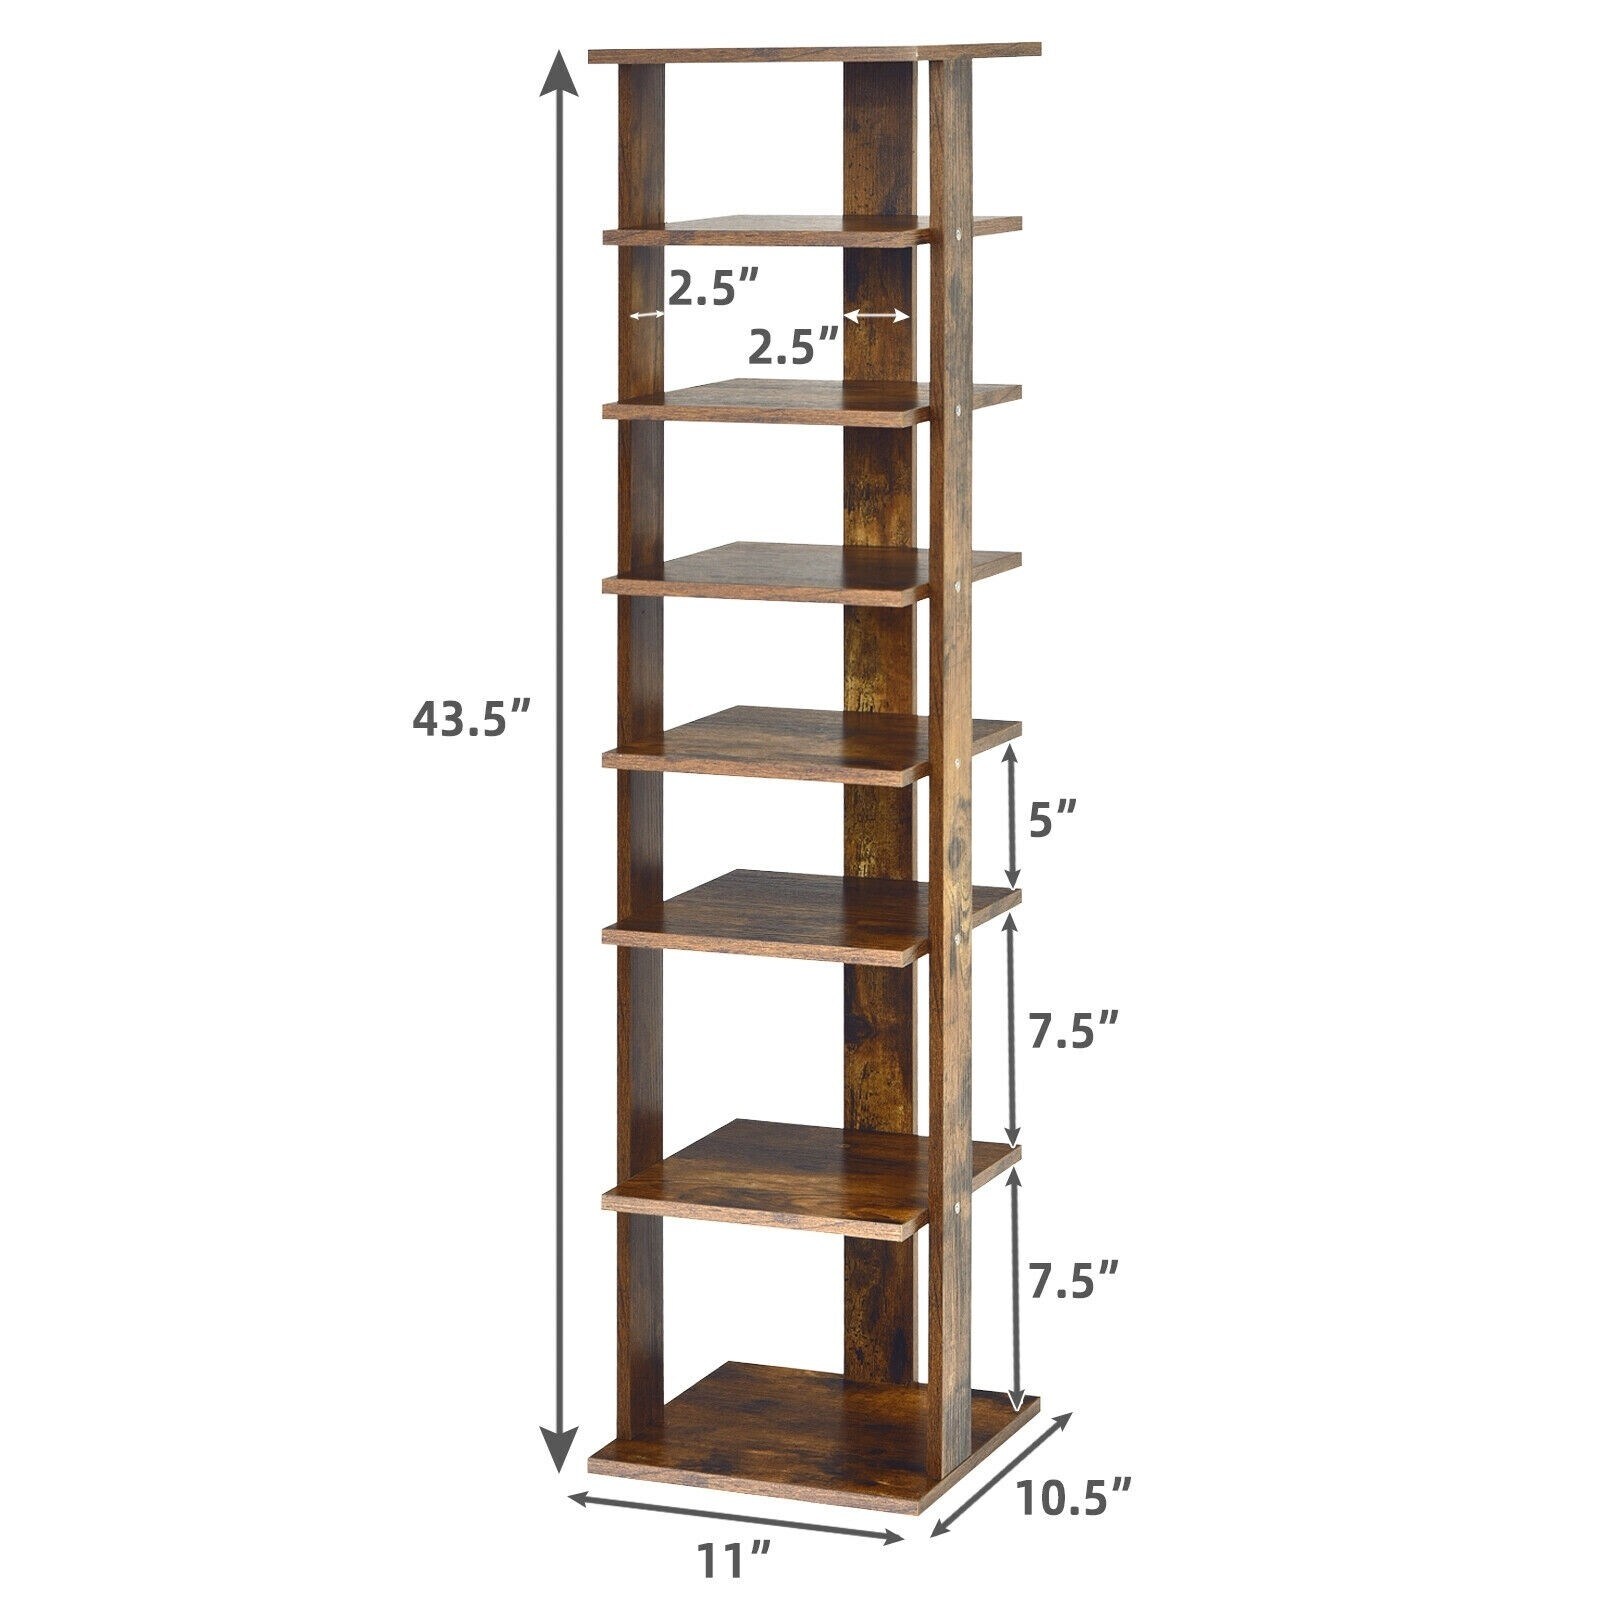 https://ak1.ostkcdn.com/images/products/is/images/direct/74bf1c2ad3f8a9a99f029310fbc786f019192b7d/Wooden-Shoes-Storage-Stand-7-Tiers-Shoe-Rack-Organizer-Multi-shoe-Rack-Shoebo.jpg